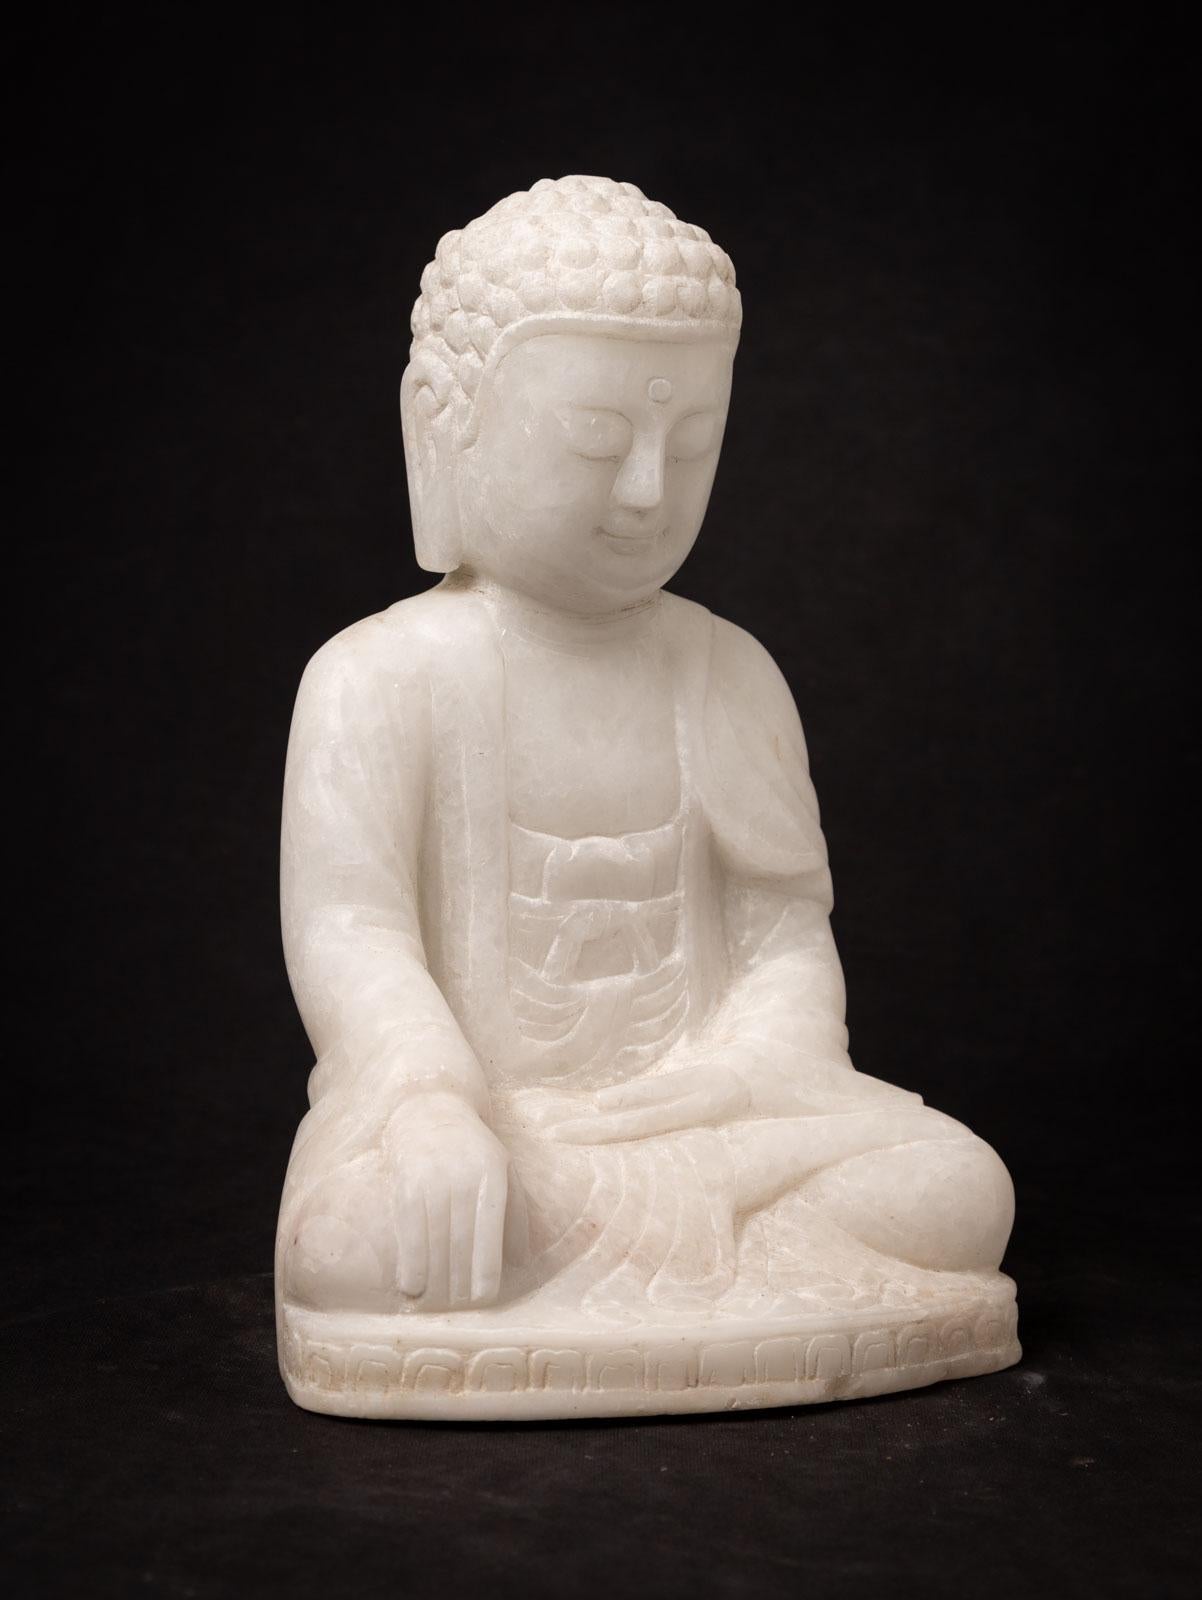 This elegant Old marble Buddha statue, portraying the Bhumisparsha mudra, is a work of art that stands at 29,5 cm in height, with dimensions of 19,4 cm in width and 15,8 cm in depth. Carved by hand from a single block of white marble, it represents